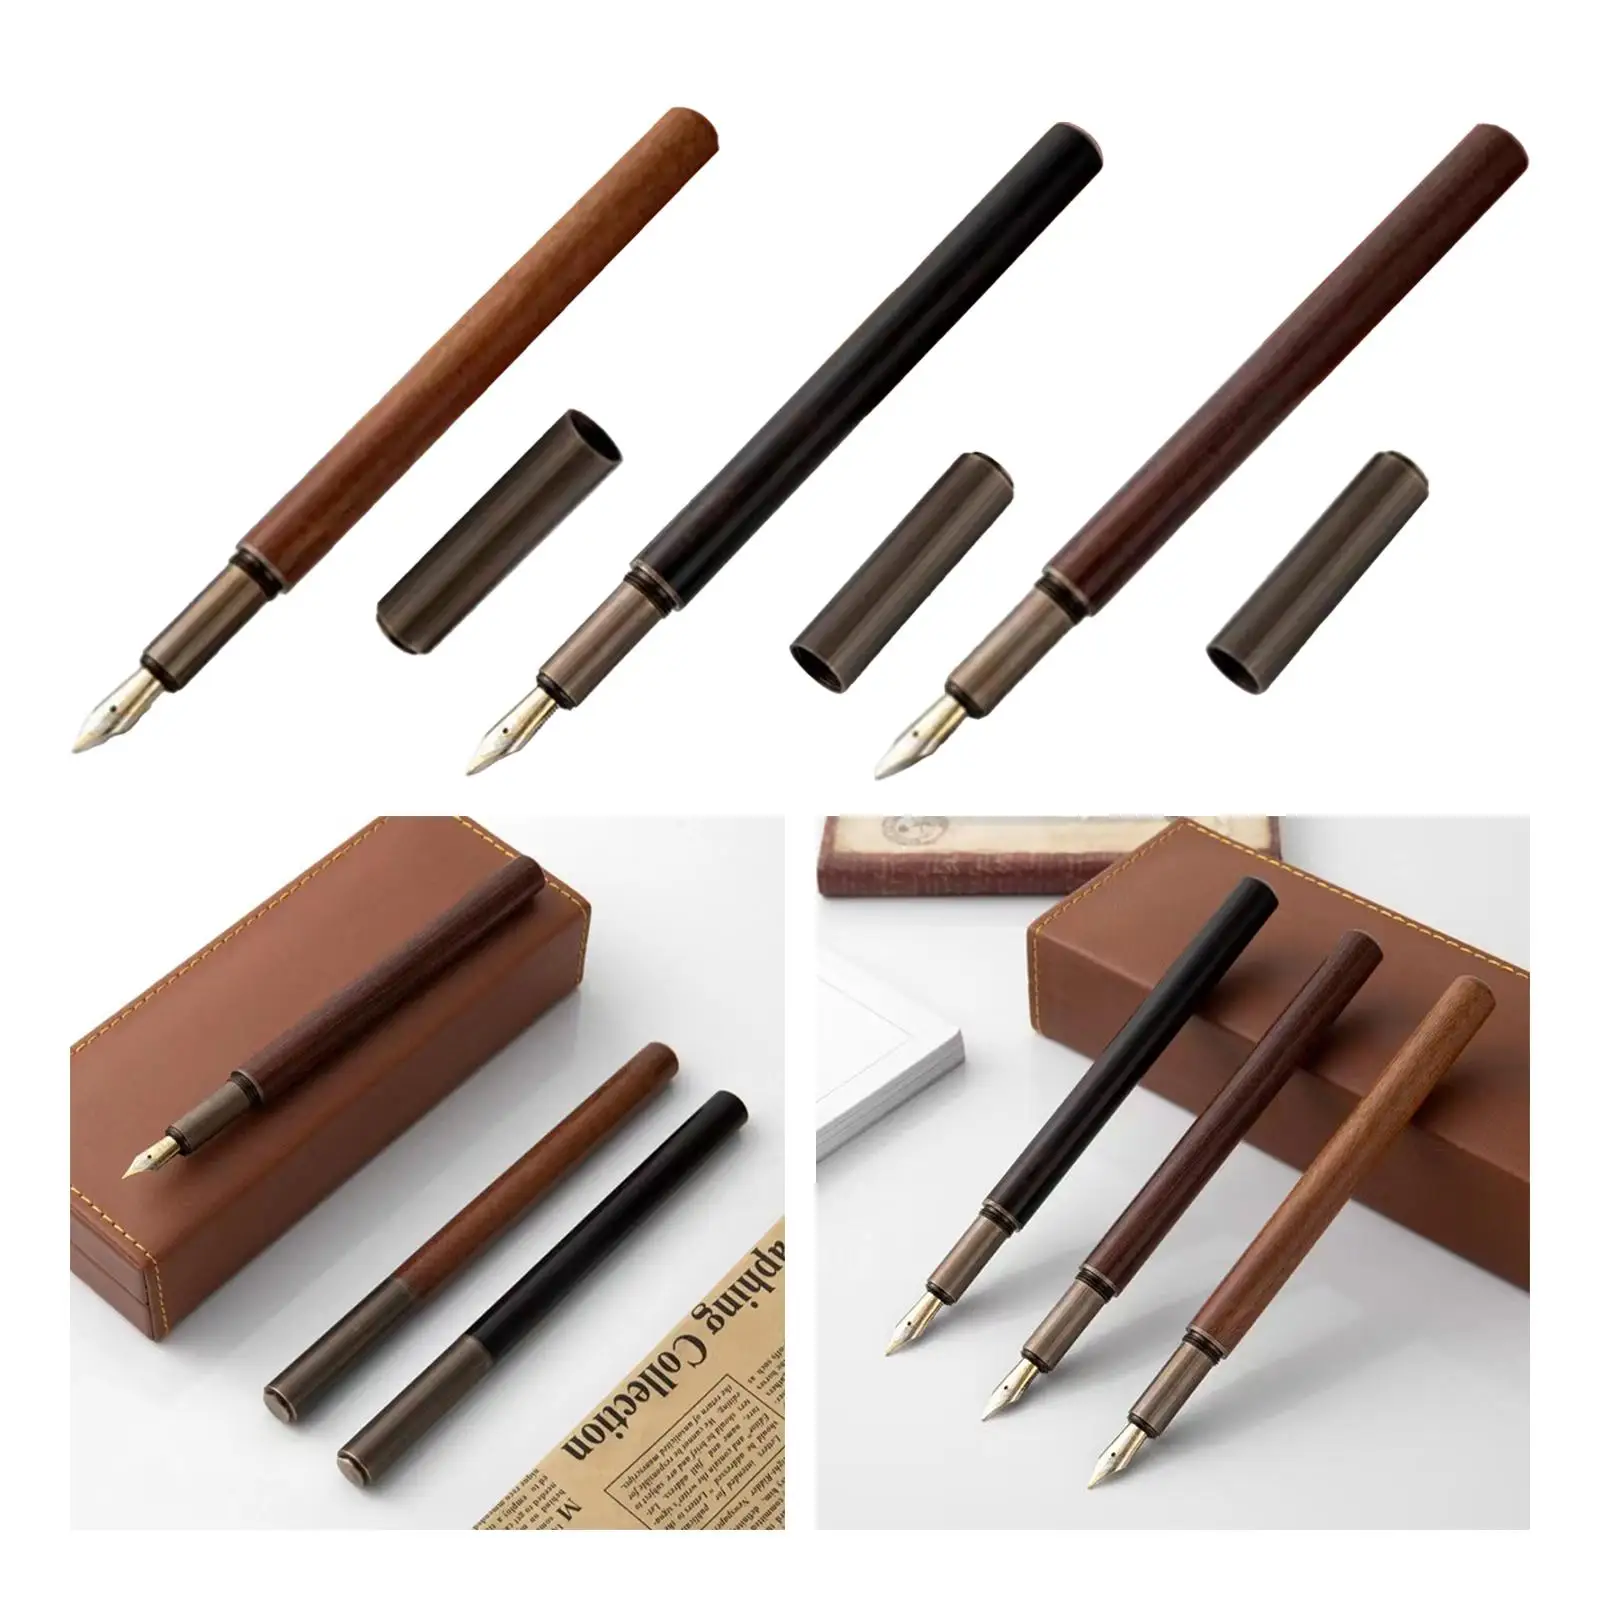 Fountain Pen 0.5mm Premium Gifts Retractable Wooden Metal Practical Office Home Portable Adults Kids Lightweight Calligraphy Pen